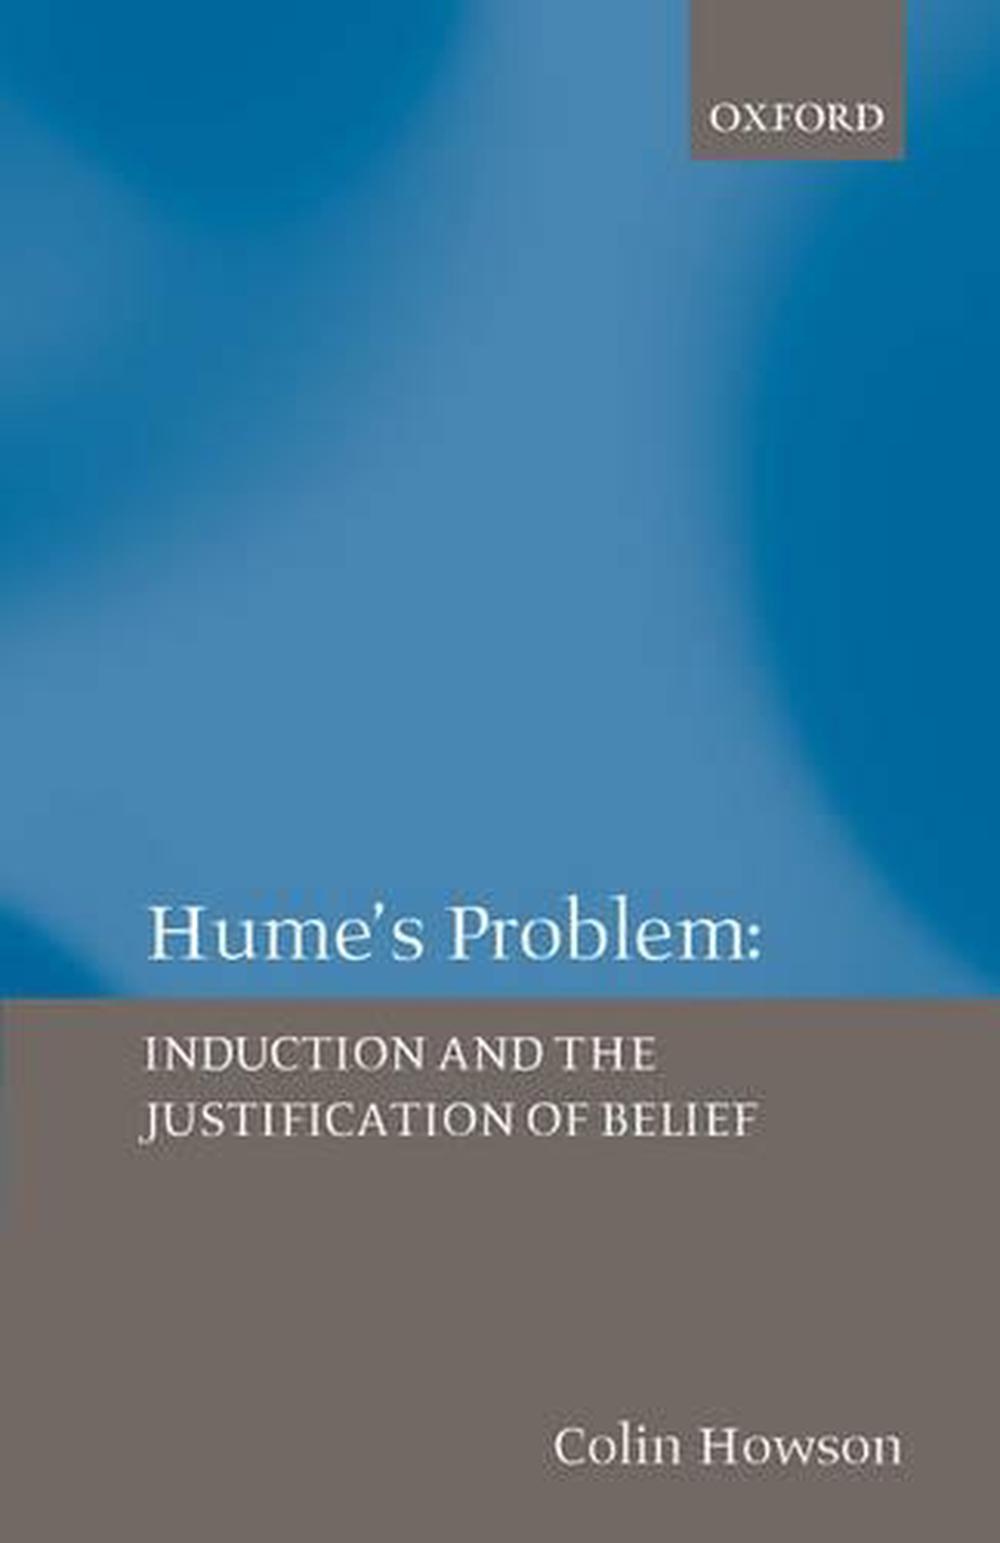 humes problem of induction